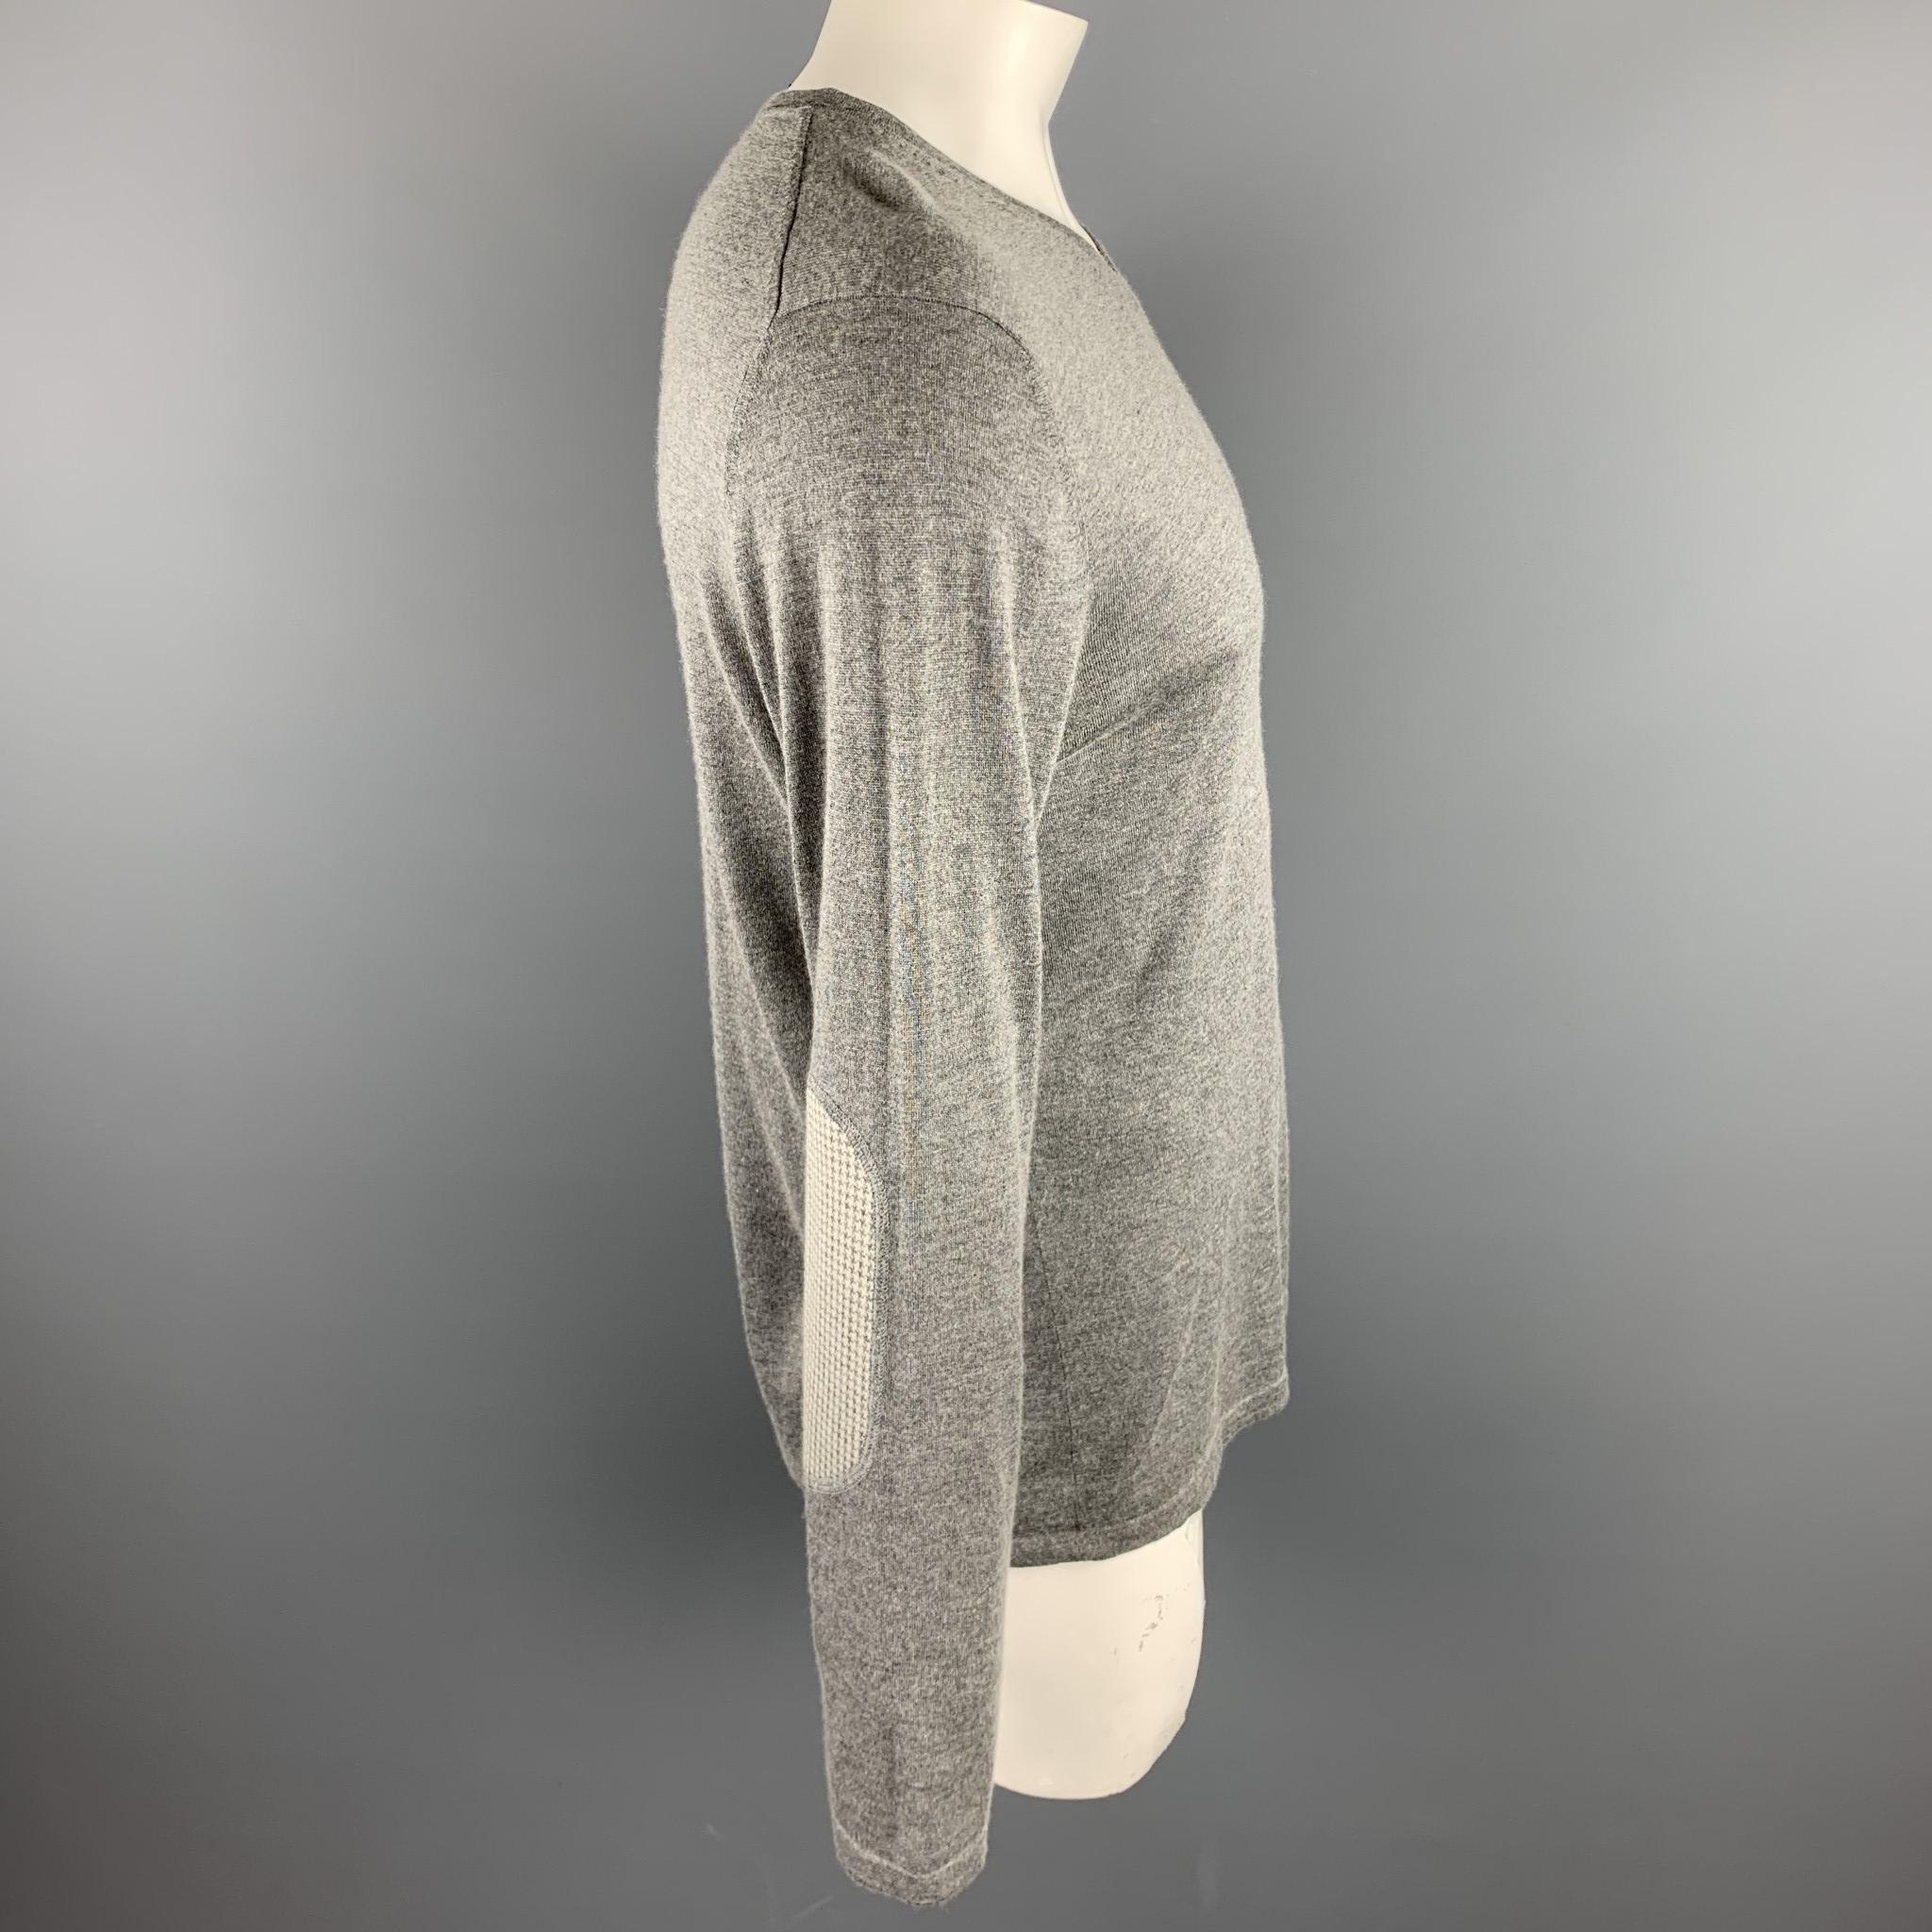 THEORY pullover comes in a gray silk / cashmere featuring elbow patch details and a v-neck. Minor wear. As-Is.

Excellent Pre-Owned Condition.
Marked: XL

Measurements:

Shoulder: 18 in. 
Chest: 42 in. 
Sleeve: 27 in. 
Length: 28 in. 